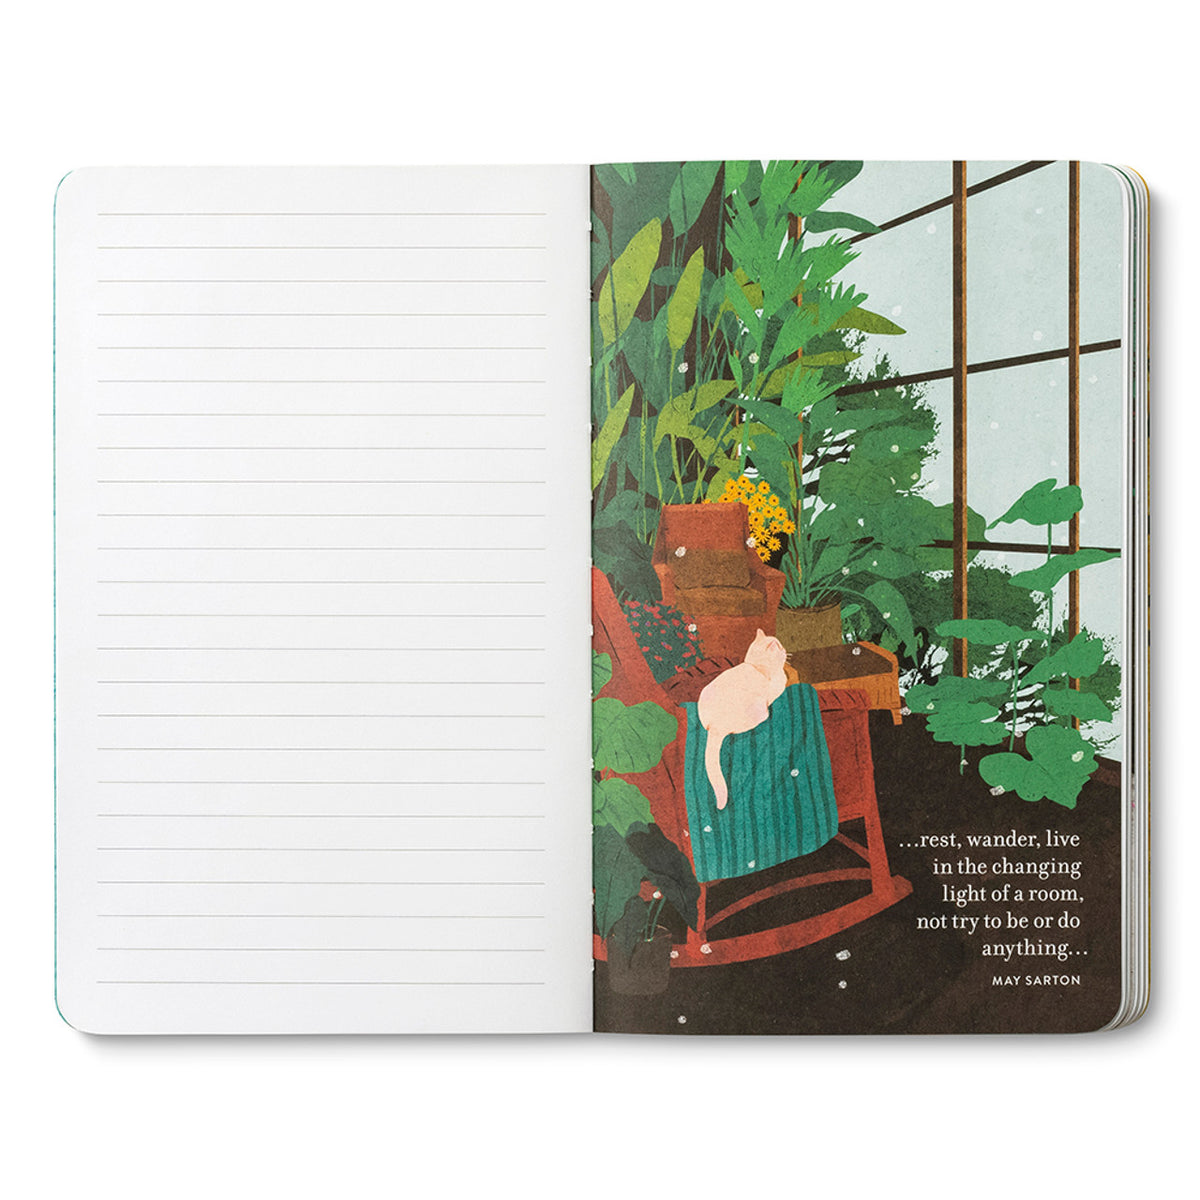 &quot;Sometimes The Most Important Thing In The Whole Day Is The Rest We Take Between Two Deep Breaths...&quot; — Etty Hillesum Write Now Softcover Journal